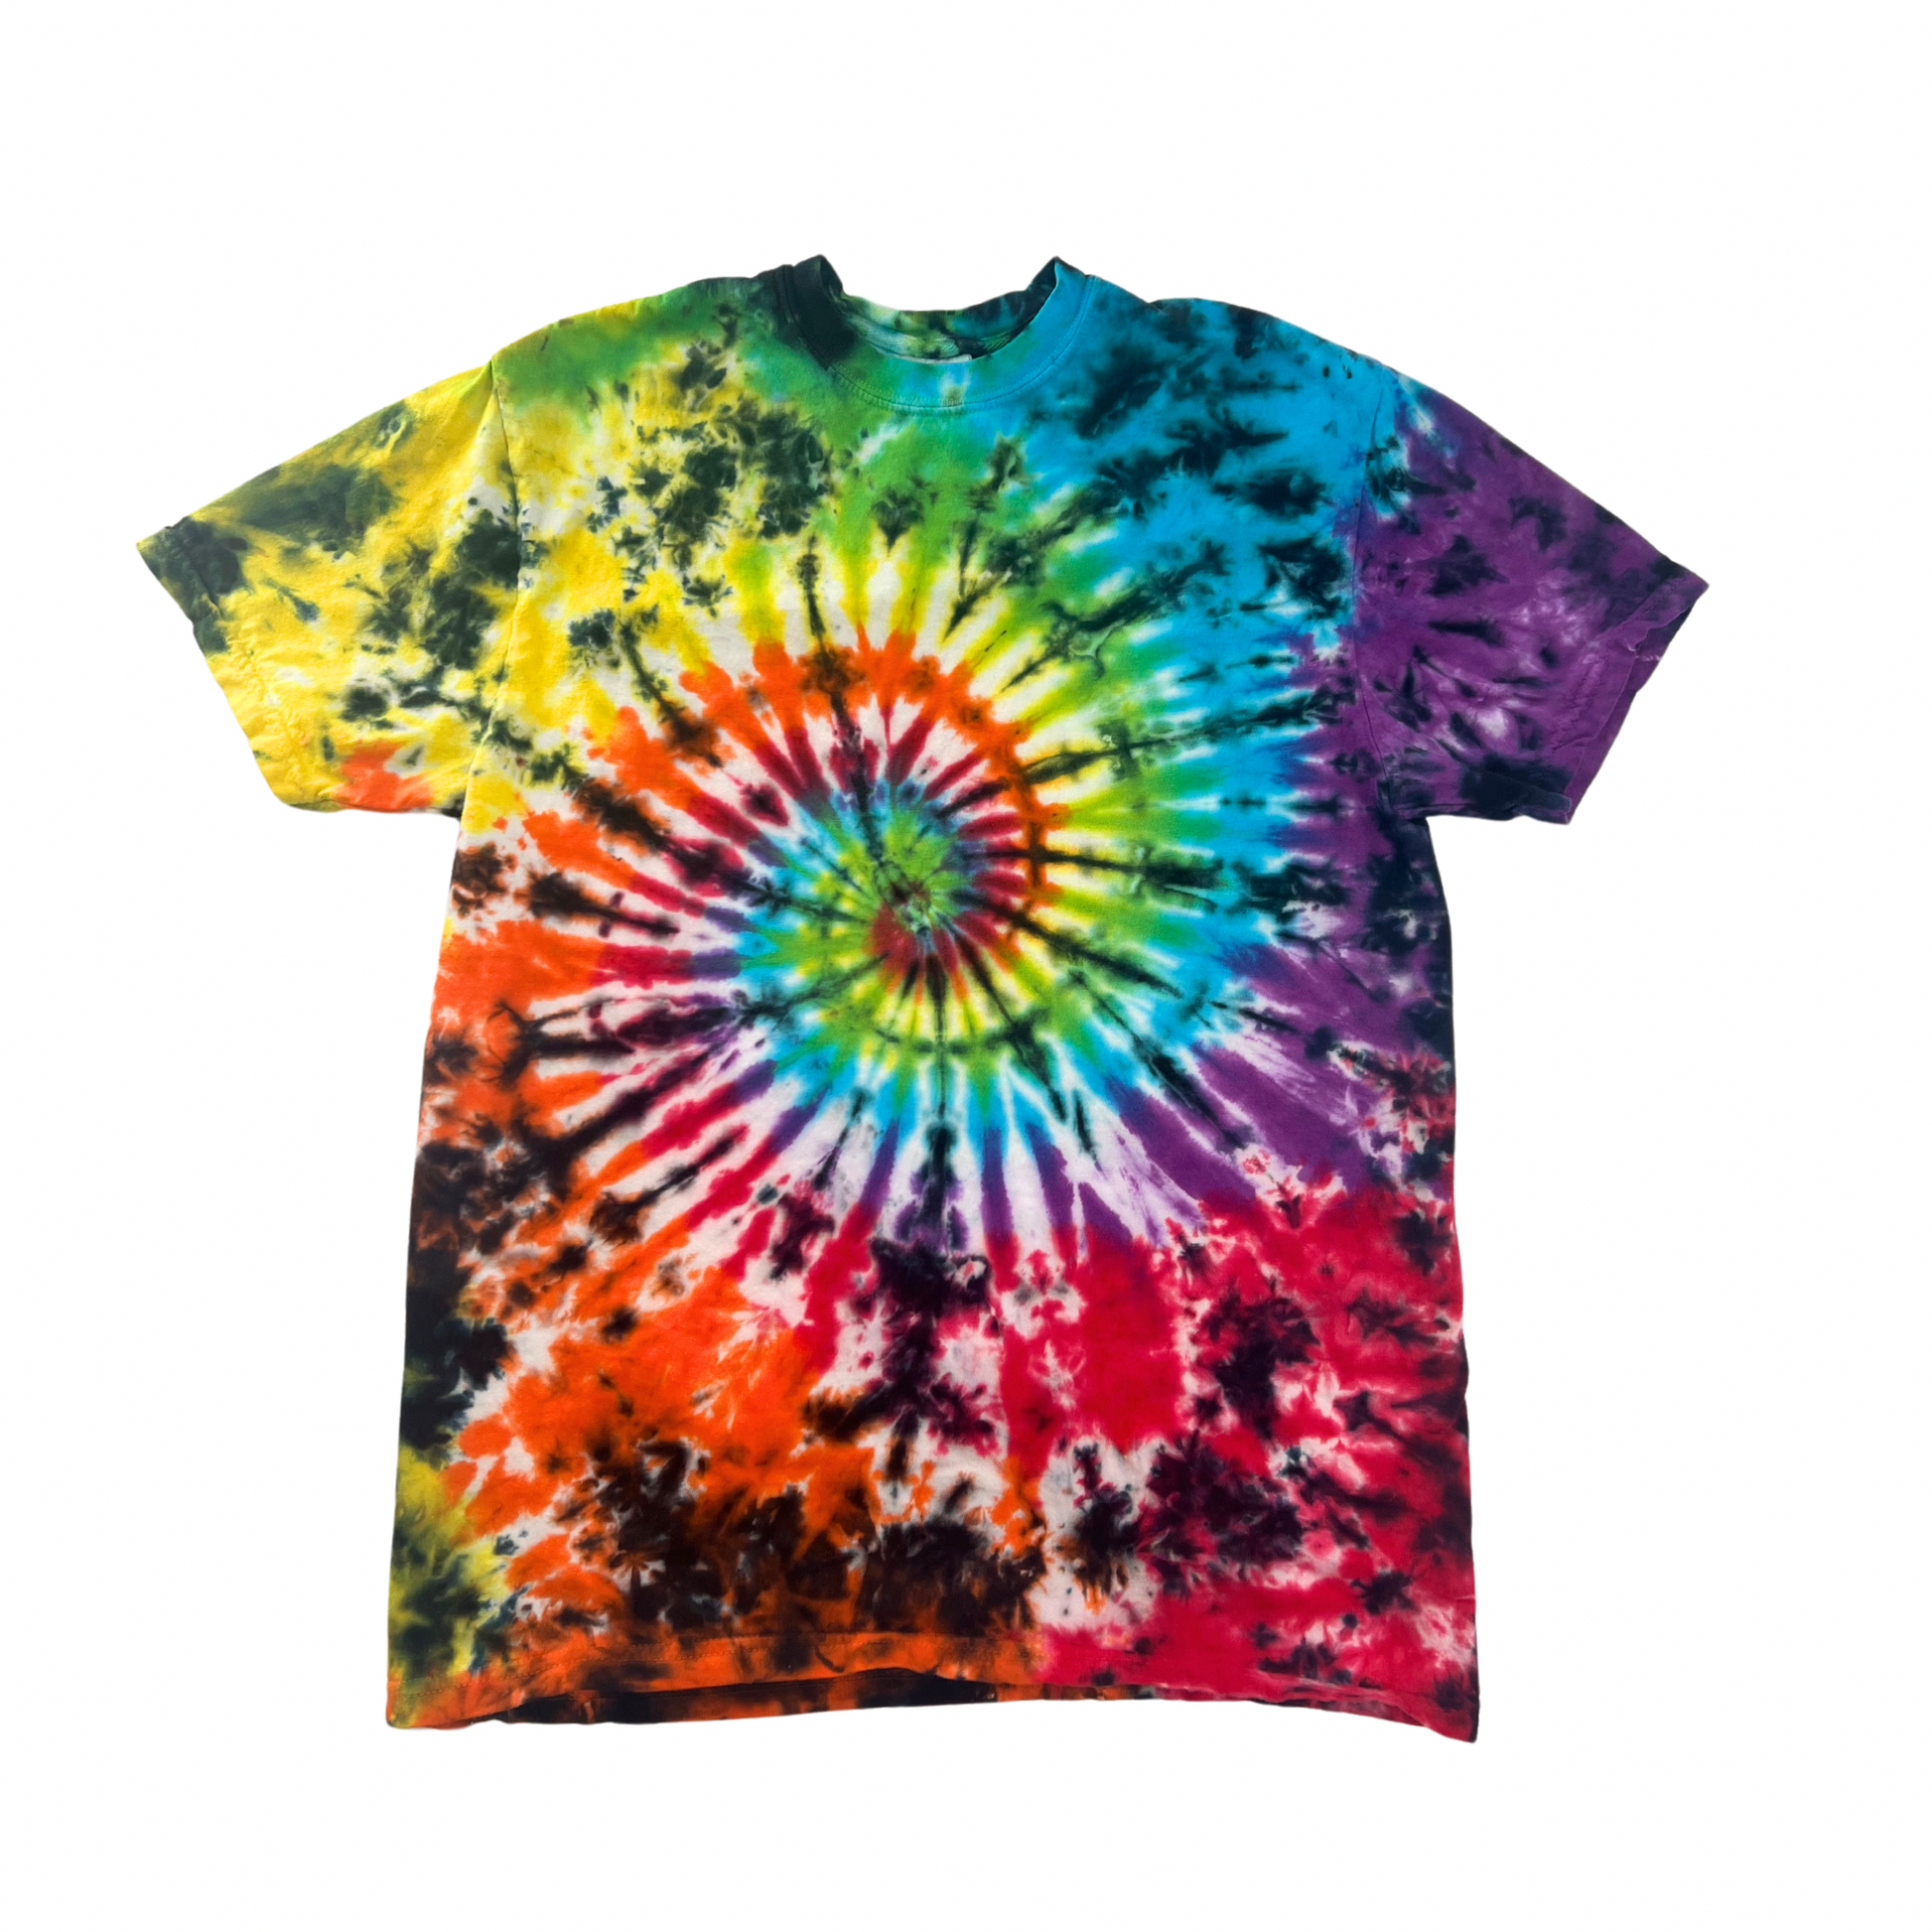 Rich Rainbow tie dye t shirt with a spiral center ultra soft 100% cotton with beautiful hues of the rainbow throughout 